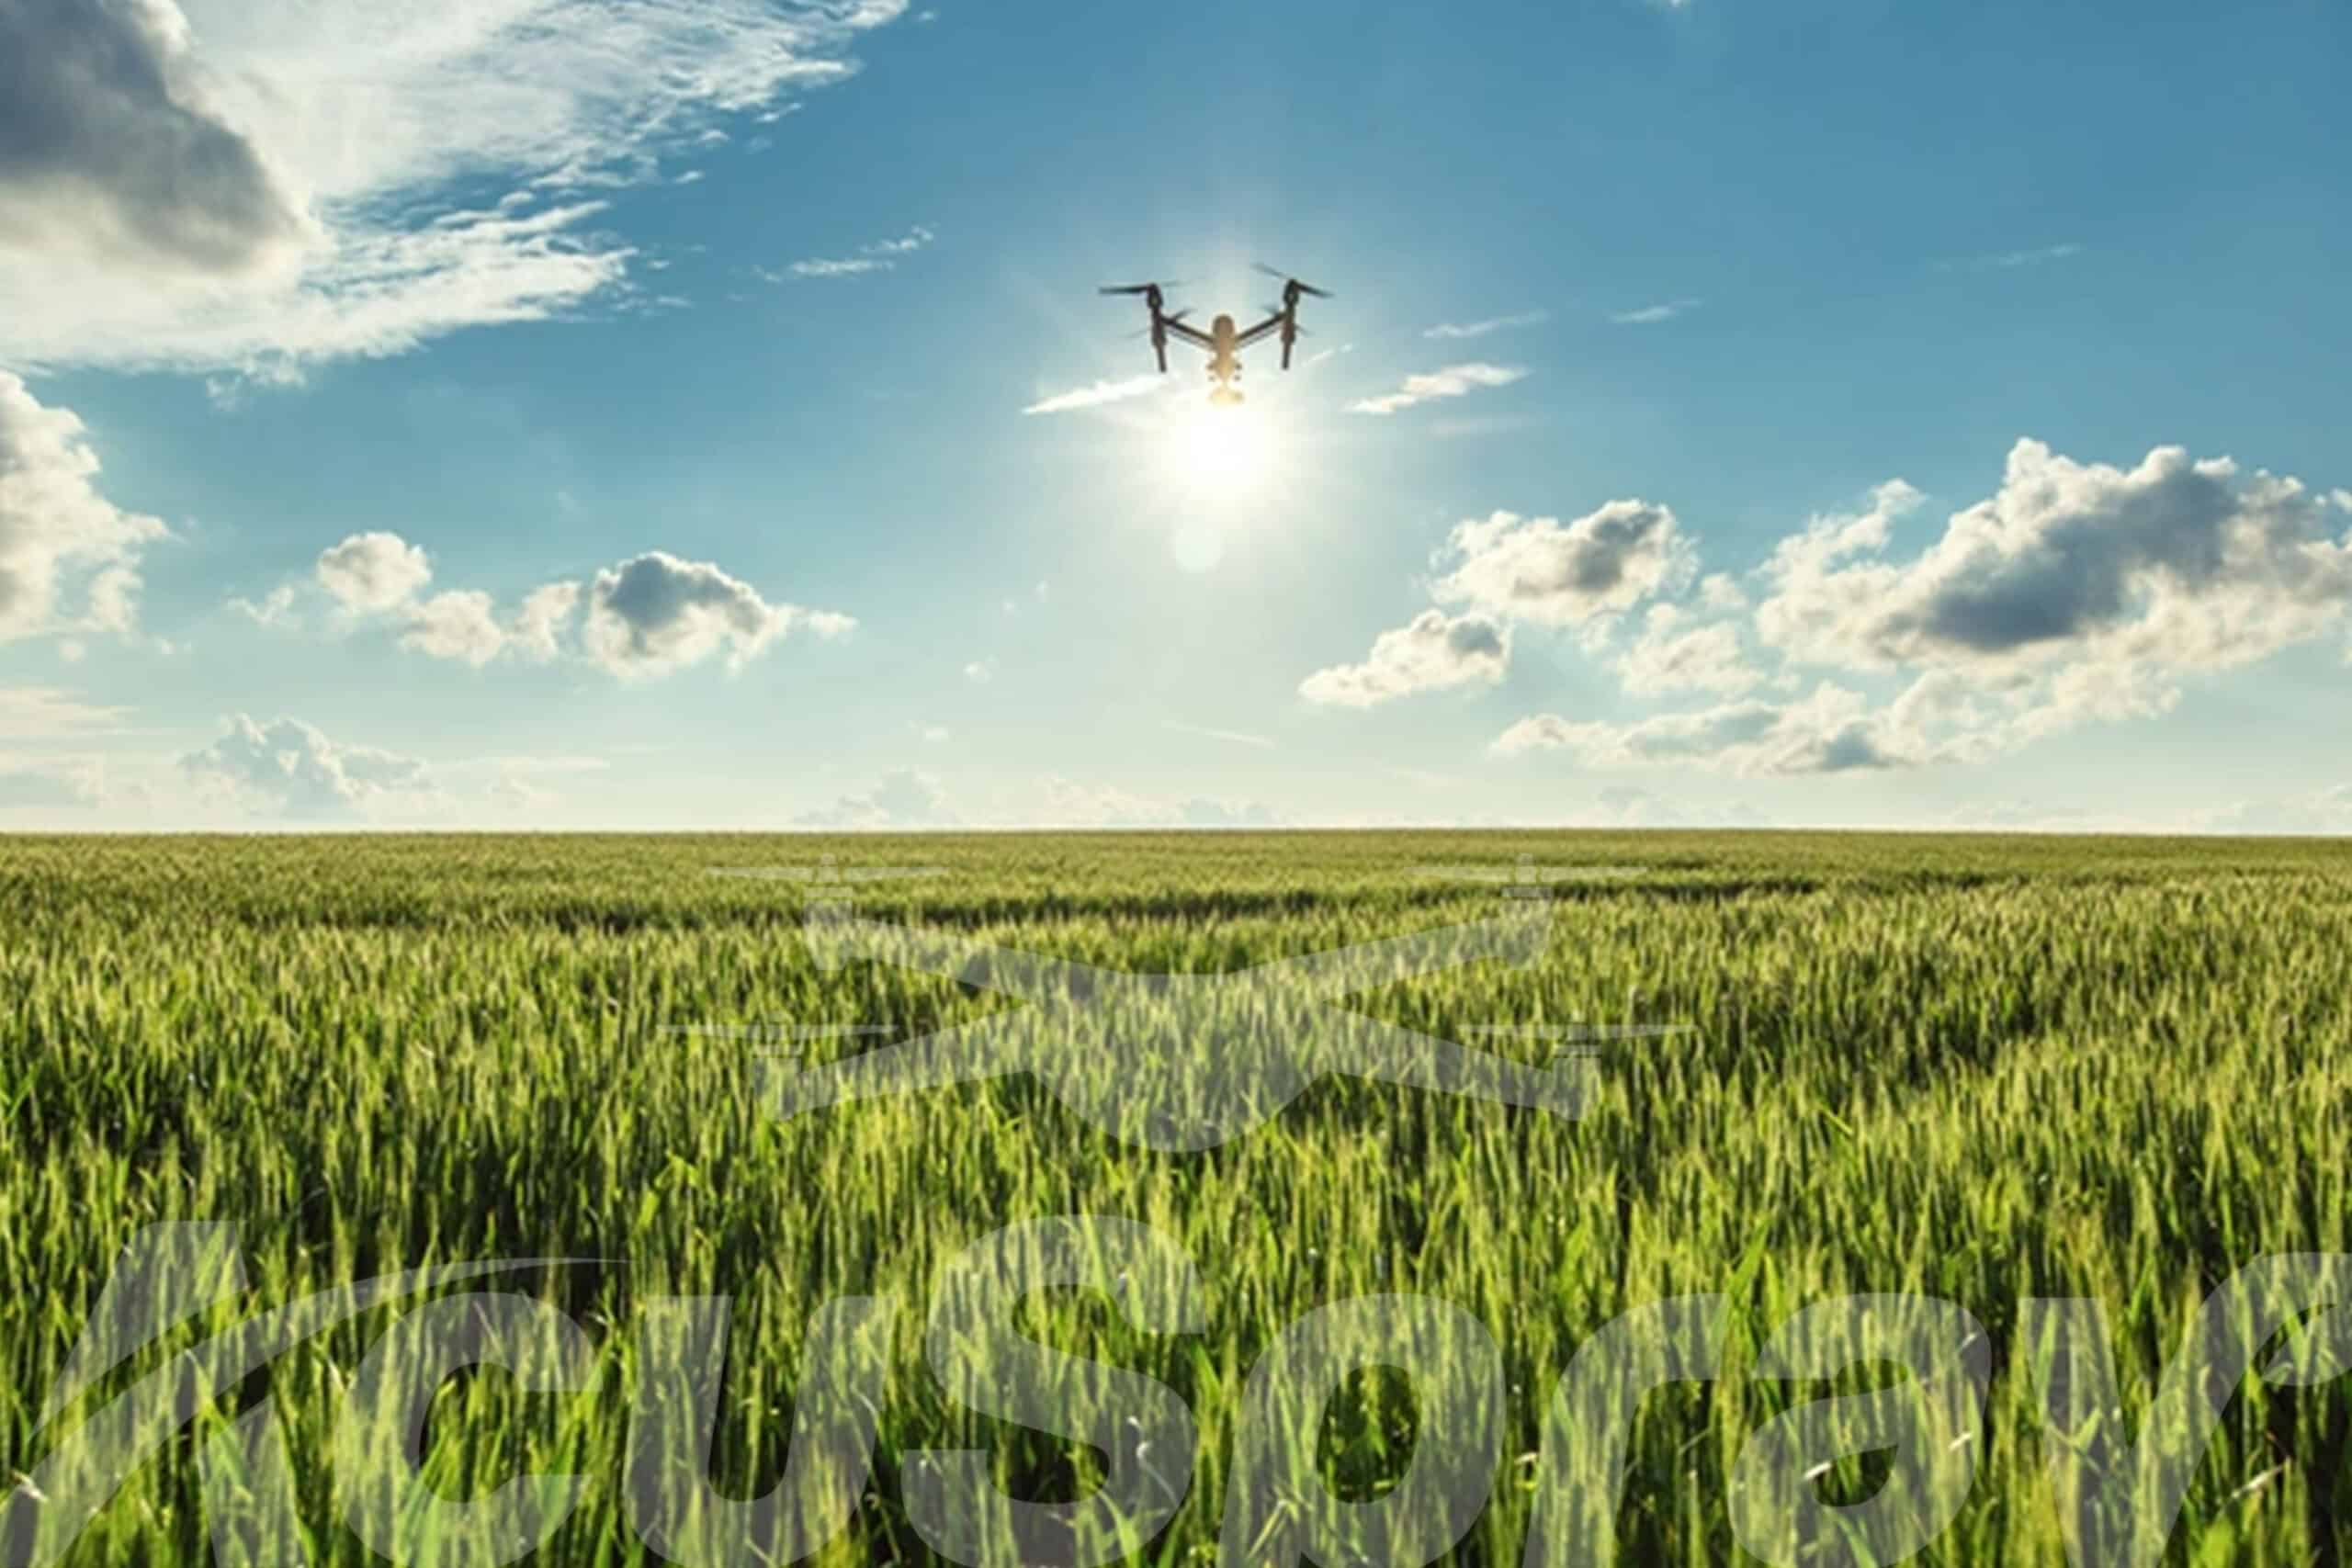 A drone equipped for precision agriculture flying over lush green crops on a sunny day, exemplifying environmental stewardship with drones.